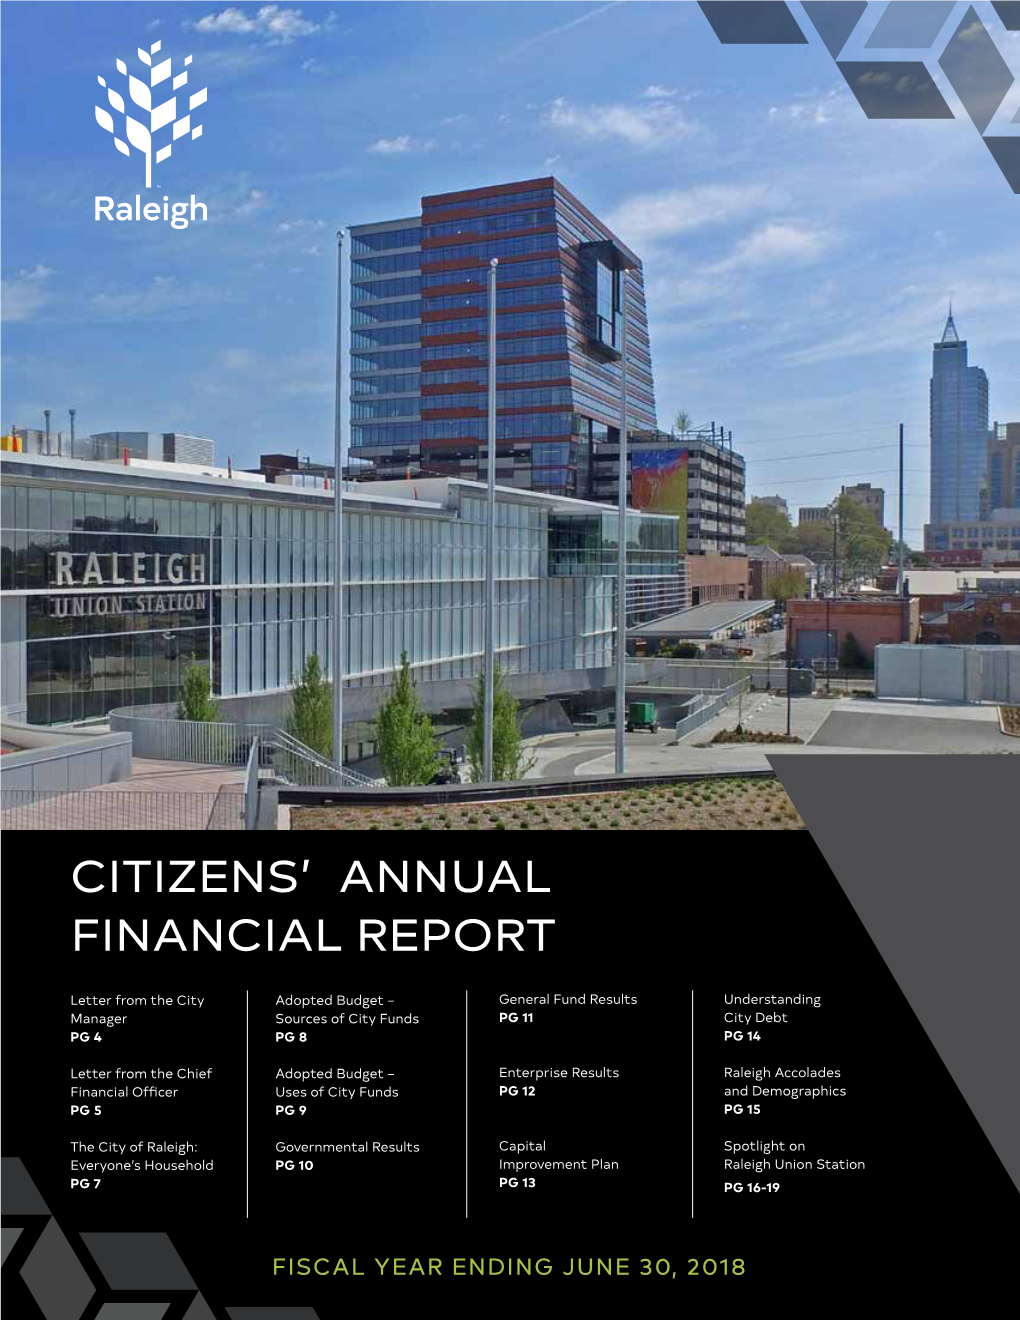 Raleigh Citizens' Annual Financial Report 2018